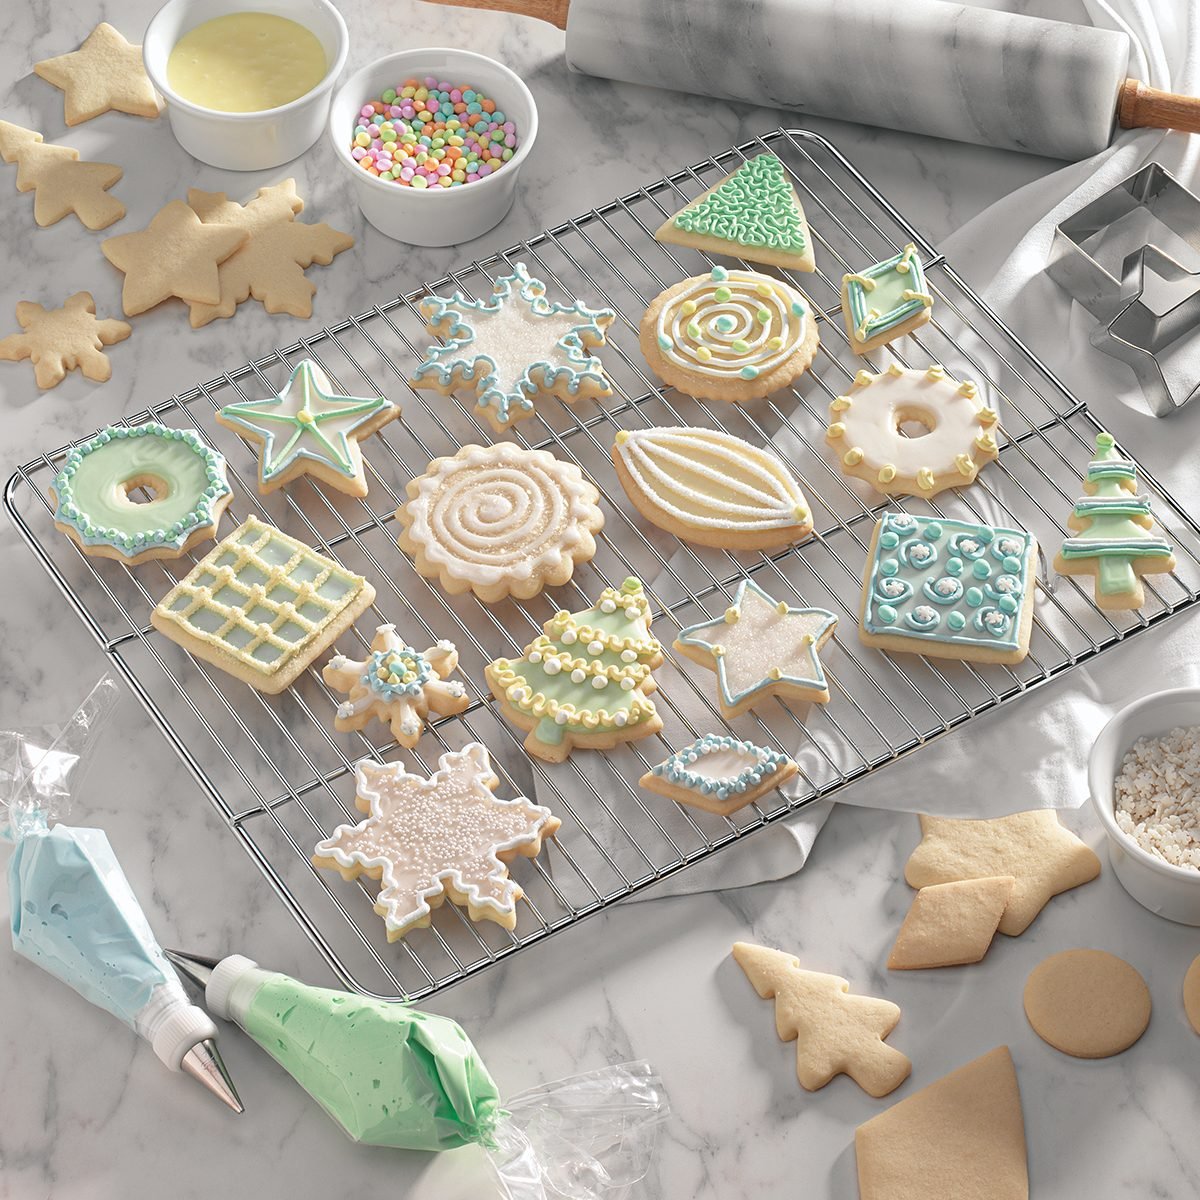 9 easy christmas cookie decorating ideas | taste of home